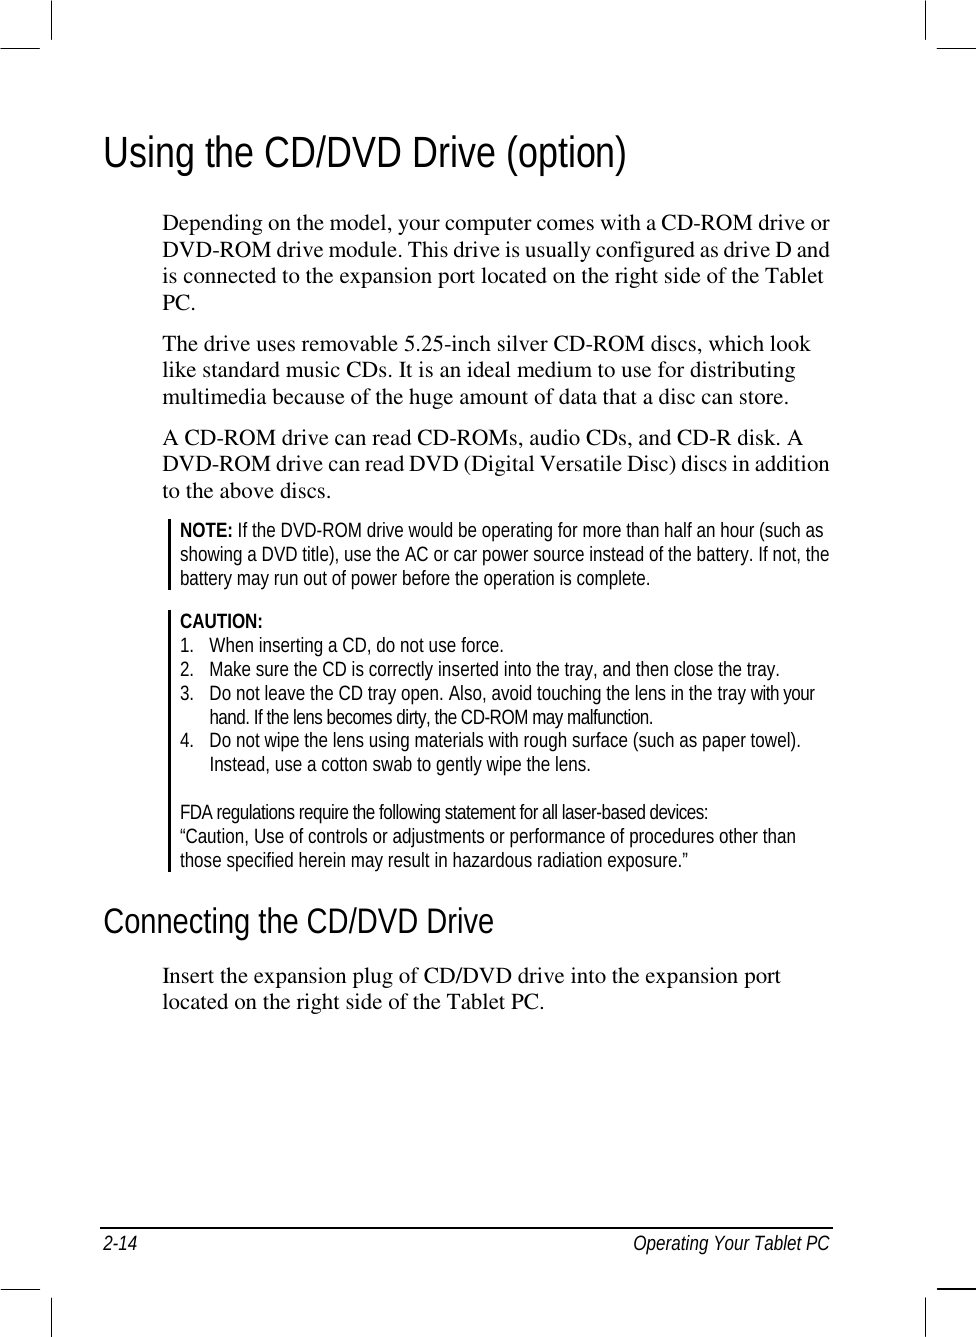  2-14  Operating Your Tablet PC Using the CD/DVD Drive (option) Depending on the model, your computer comes with a CD-ROM drive or DVD-ROM drive module. This drive is usually configured as drive D and is connected to the expansion port located on the right side of the Tablet PC. The drive uses removable 5.25-inch silver CD-ROM discs, which look like standard music CDs. It is an ideal medium to use for distributing multimedia because of the huge amount of data that a disc can store. A CD-ROM drive can read CD-ROMs, audio CDs, and CD-R disk. A DVD-ROM drive can read DVD (Digital Versatile Disc) discs in addition to the above discs. NOTE: If the DVD-ROM drive would be operating for more than half an hour (such as showing a DVD title), use the AC or car power source instead of the battery. If not, the battery may run out of power before the operation is complete.  CAUTION: 1.  When inserting a CD, do not use force. 2.  Make sure the CD is correctly inserted into the tray, and then close the tray. 3.  Do not leave the CD tray open. Also, avoid touching the lens in the tray with your   hand. If the lens becomes dirty, the CD-ROM may malfunction. 4.  Do not wipe the lens using materials with rough surface (such as paper towel).   Instead, use a cotton swab to gently wipe the lens.  FDA regulations require the following statement for all laser-based devices: “Caution, Use of controls or adjustments or performance of procedures other than those specified herein may result in hazardous radiation exposure.” Connecting the CD/DVD Drive Insert the expansion plug of CD/DVD drive into the expansion port located on the right side of the Tablet PC. 